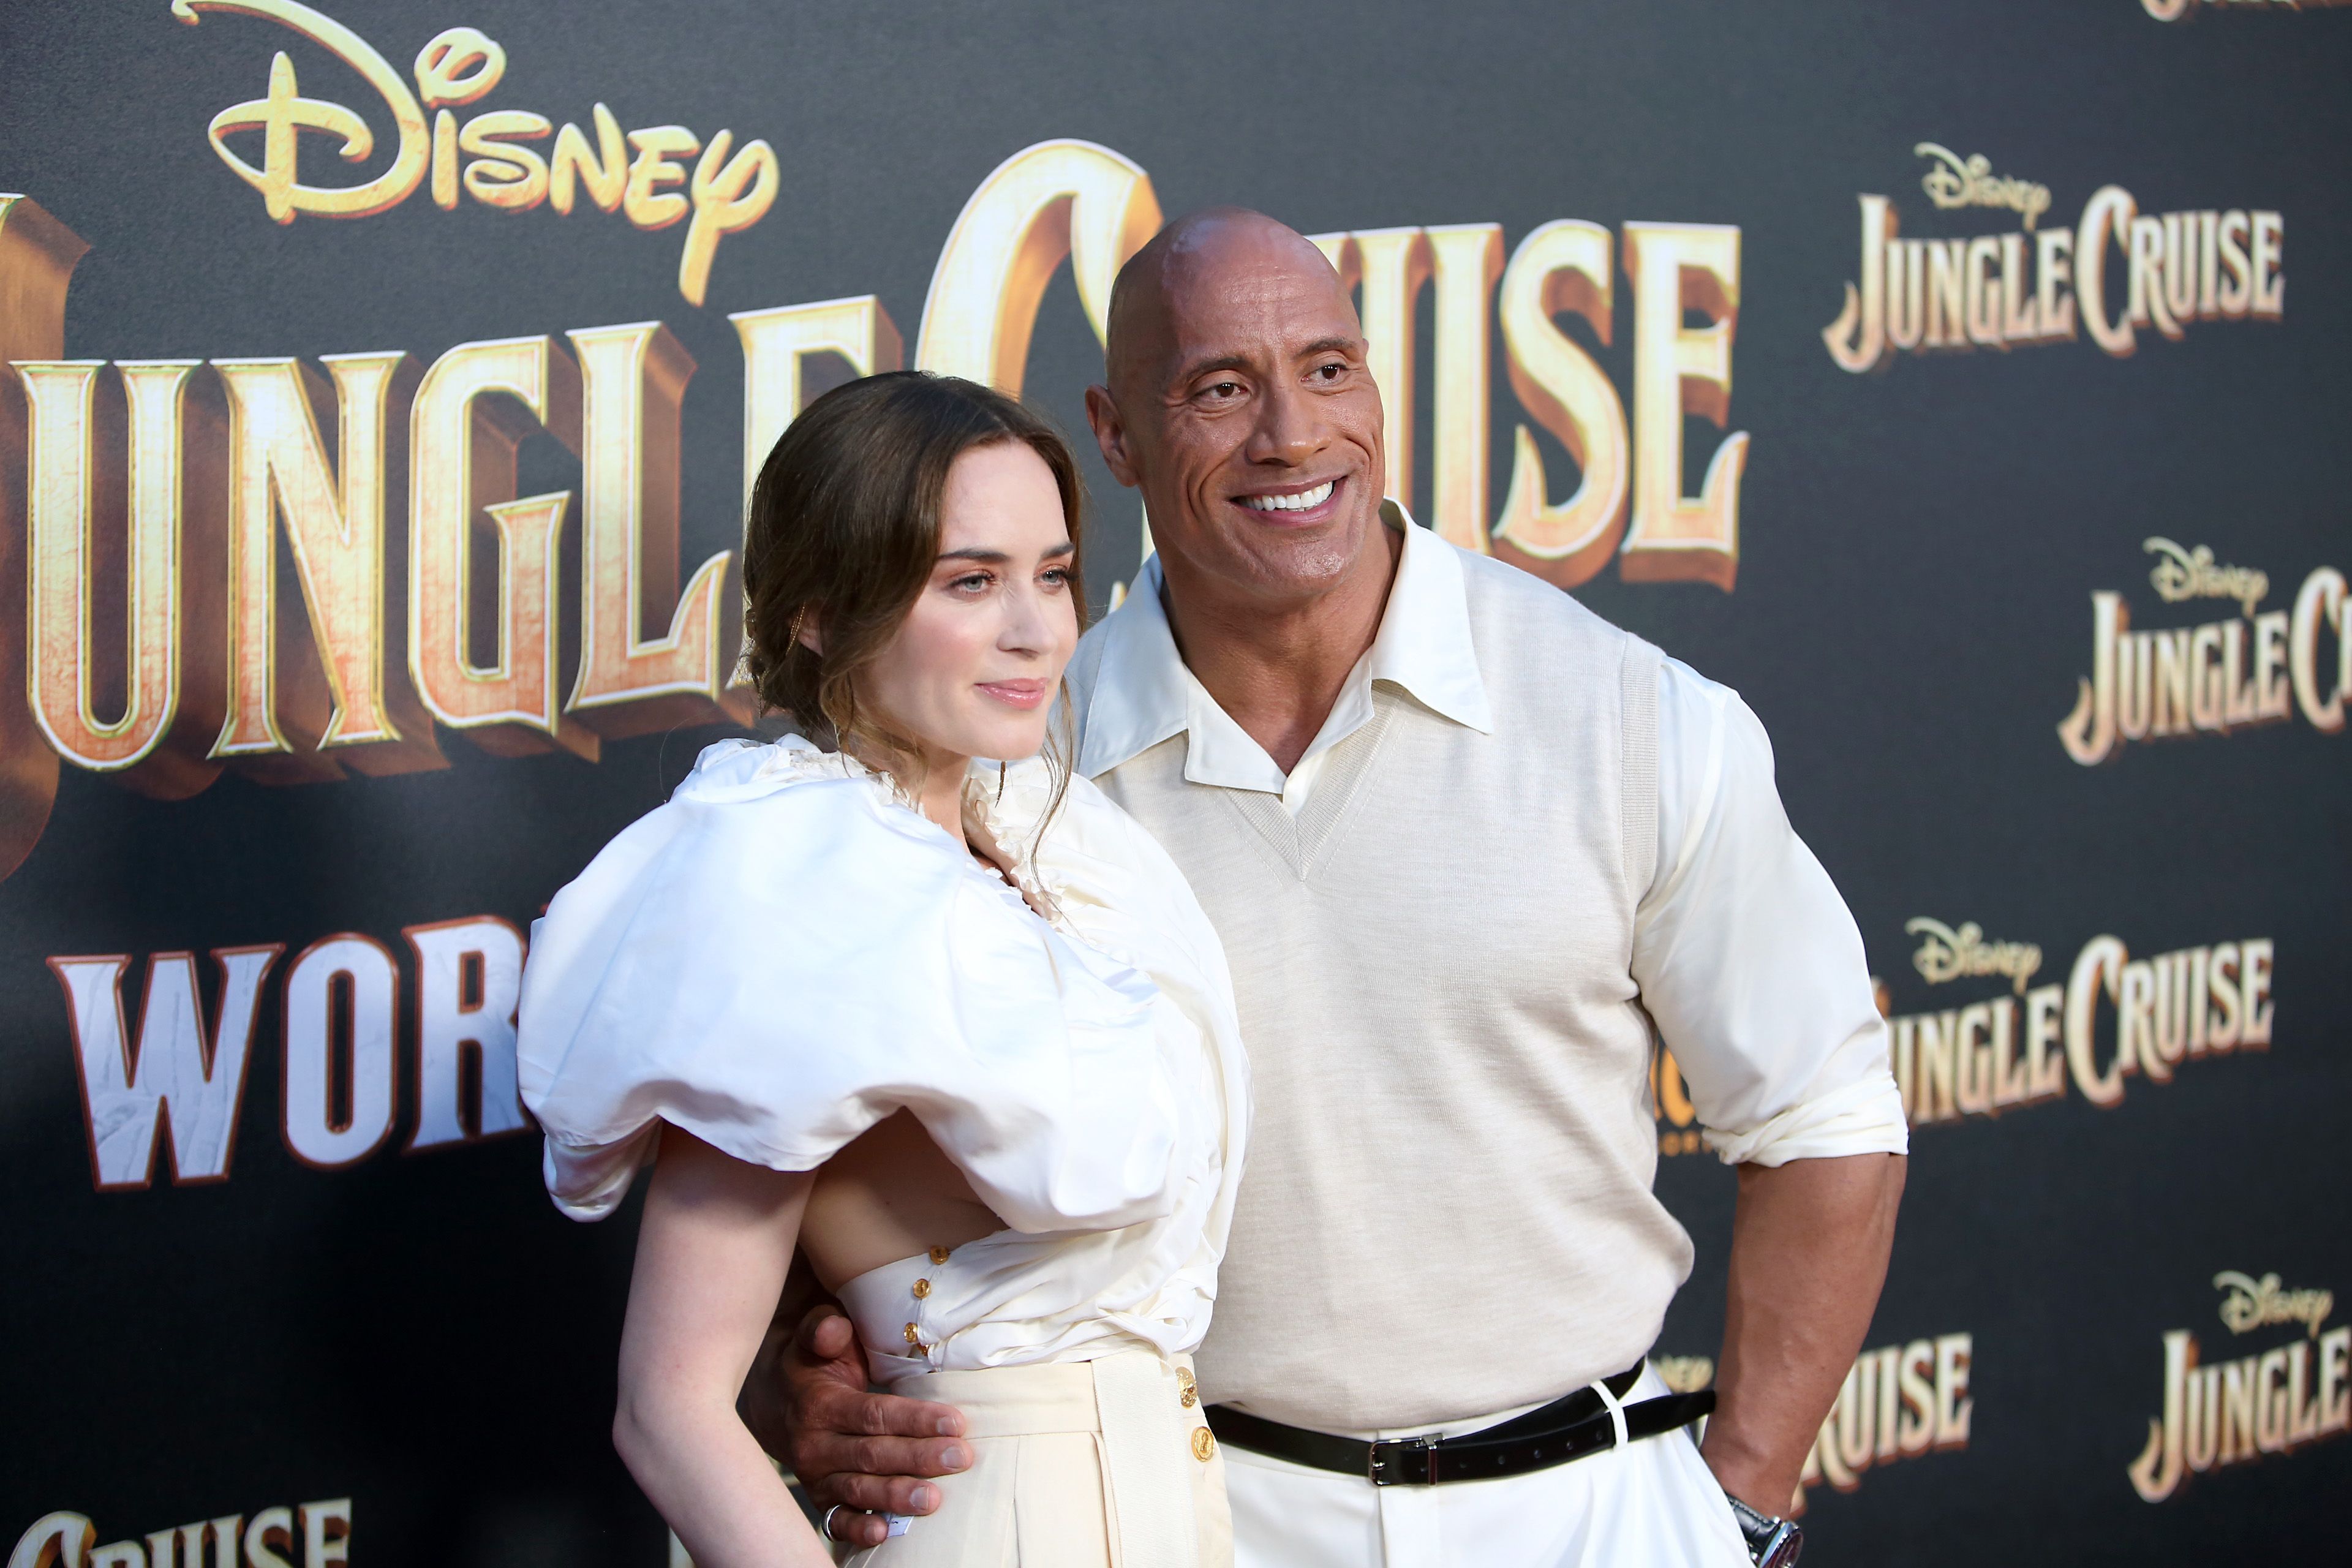 Dwayne Johnson and Emily Blunt smiling at Jungle Cruise premiere